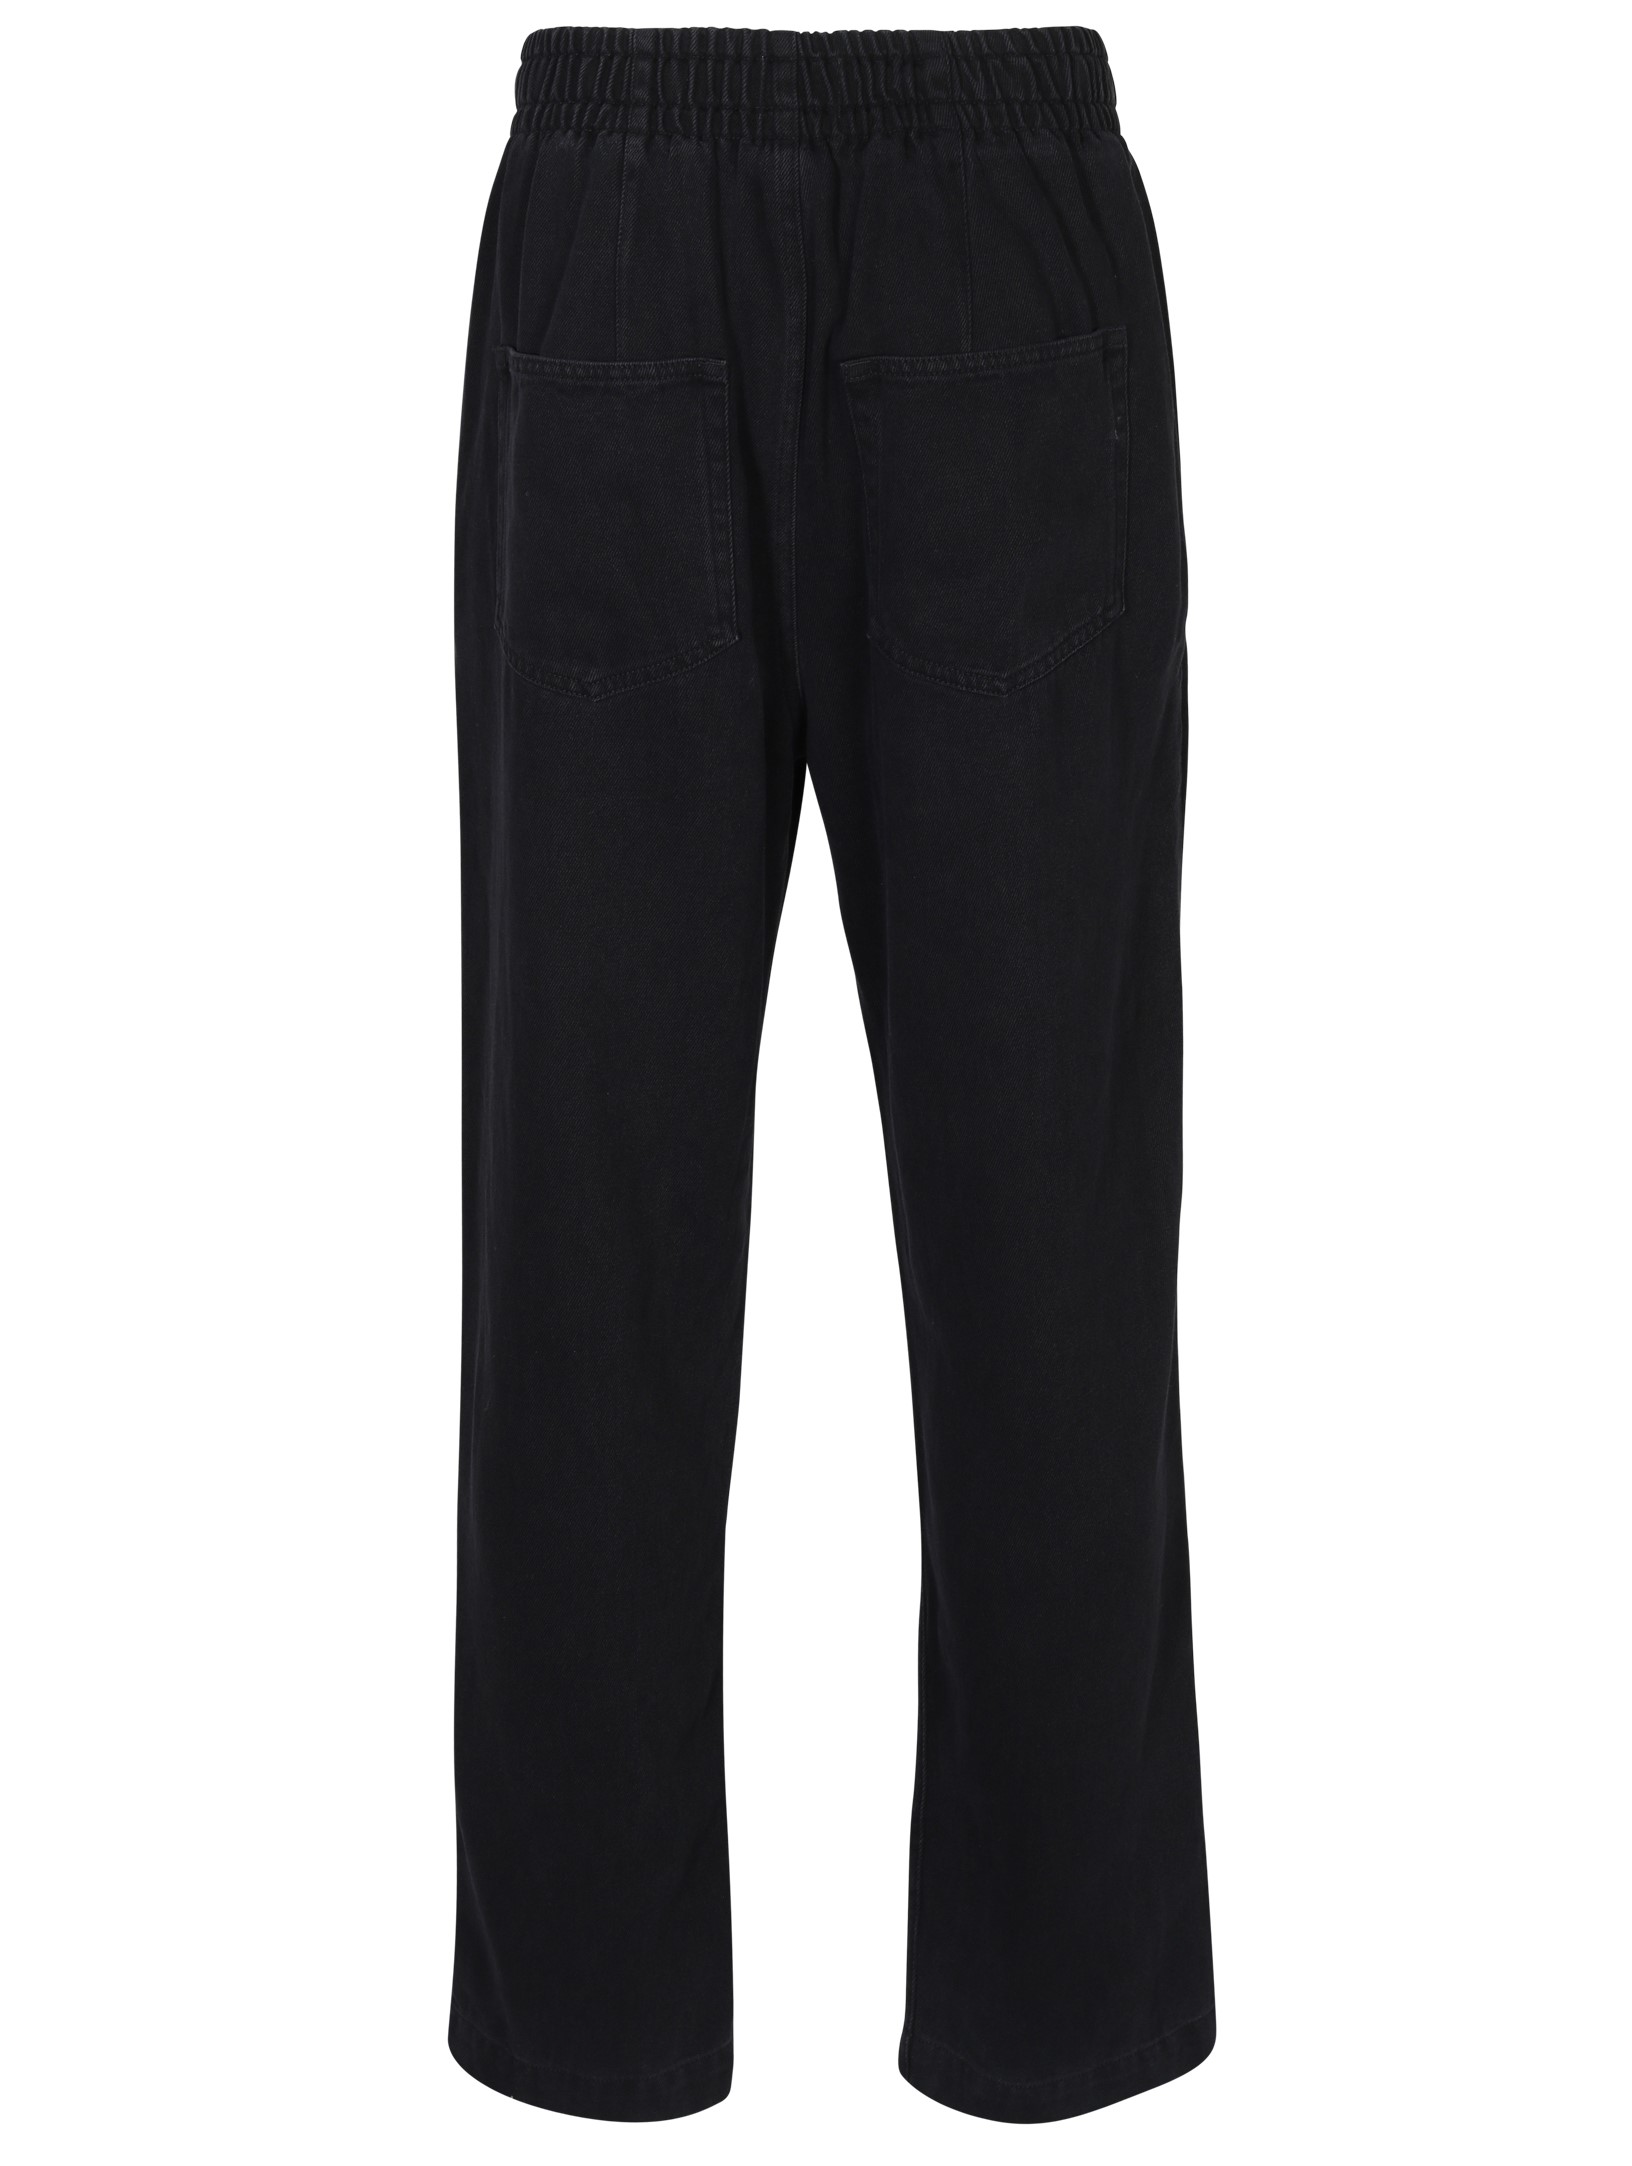 ISABEL MARANT Timeo Pant in Faded Black M